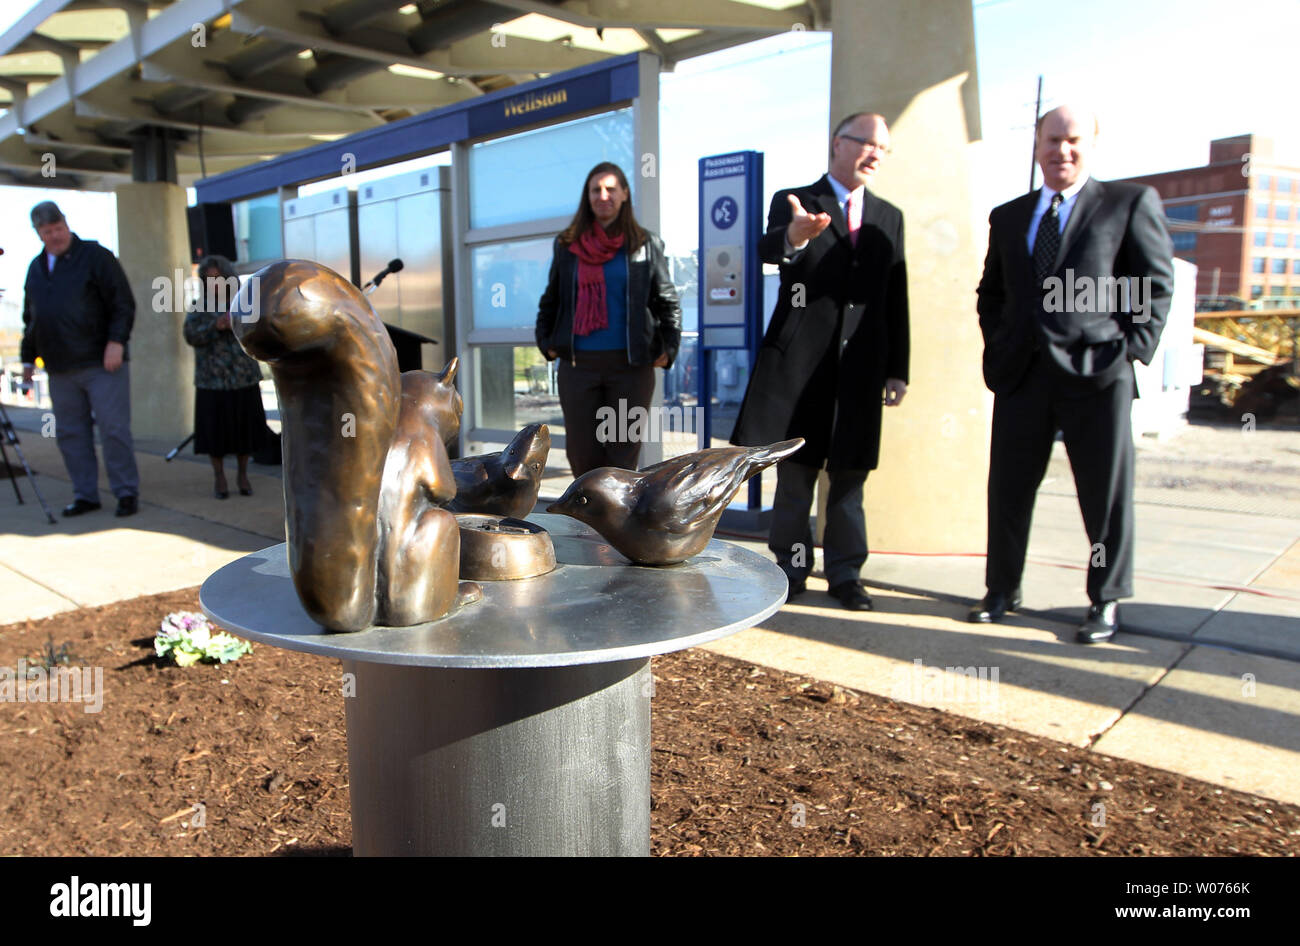 Visitors at the Wellston Metro transit stop get a closer look at the new work of artist Mary Lucking titled 'Everyone Appreciates a Punctual Train,' in Wellston, Missouri on November 14, 2012. The sculpture depict birds and a squirrel staring intently at a bronze clock and was paid for with Federal Transit Administration grants where 80 percent is funded with federal money and 20 percent with local funds. Eventually 10 art projects will be created and installed across the Metro system in the St. Louis area.  UPI/Bill Greenblatt Stock Photo